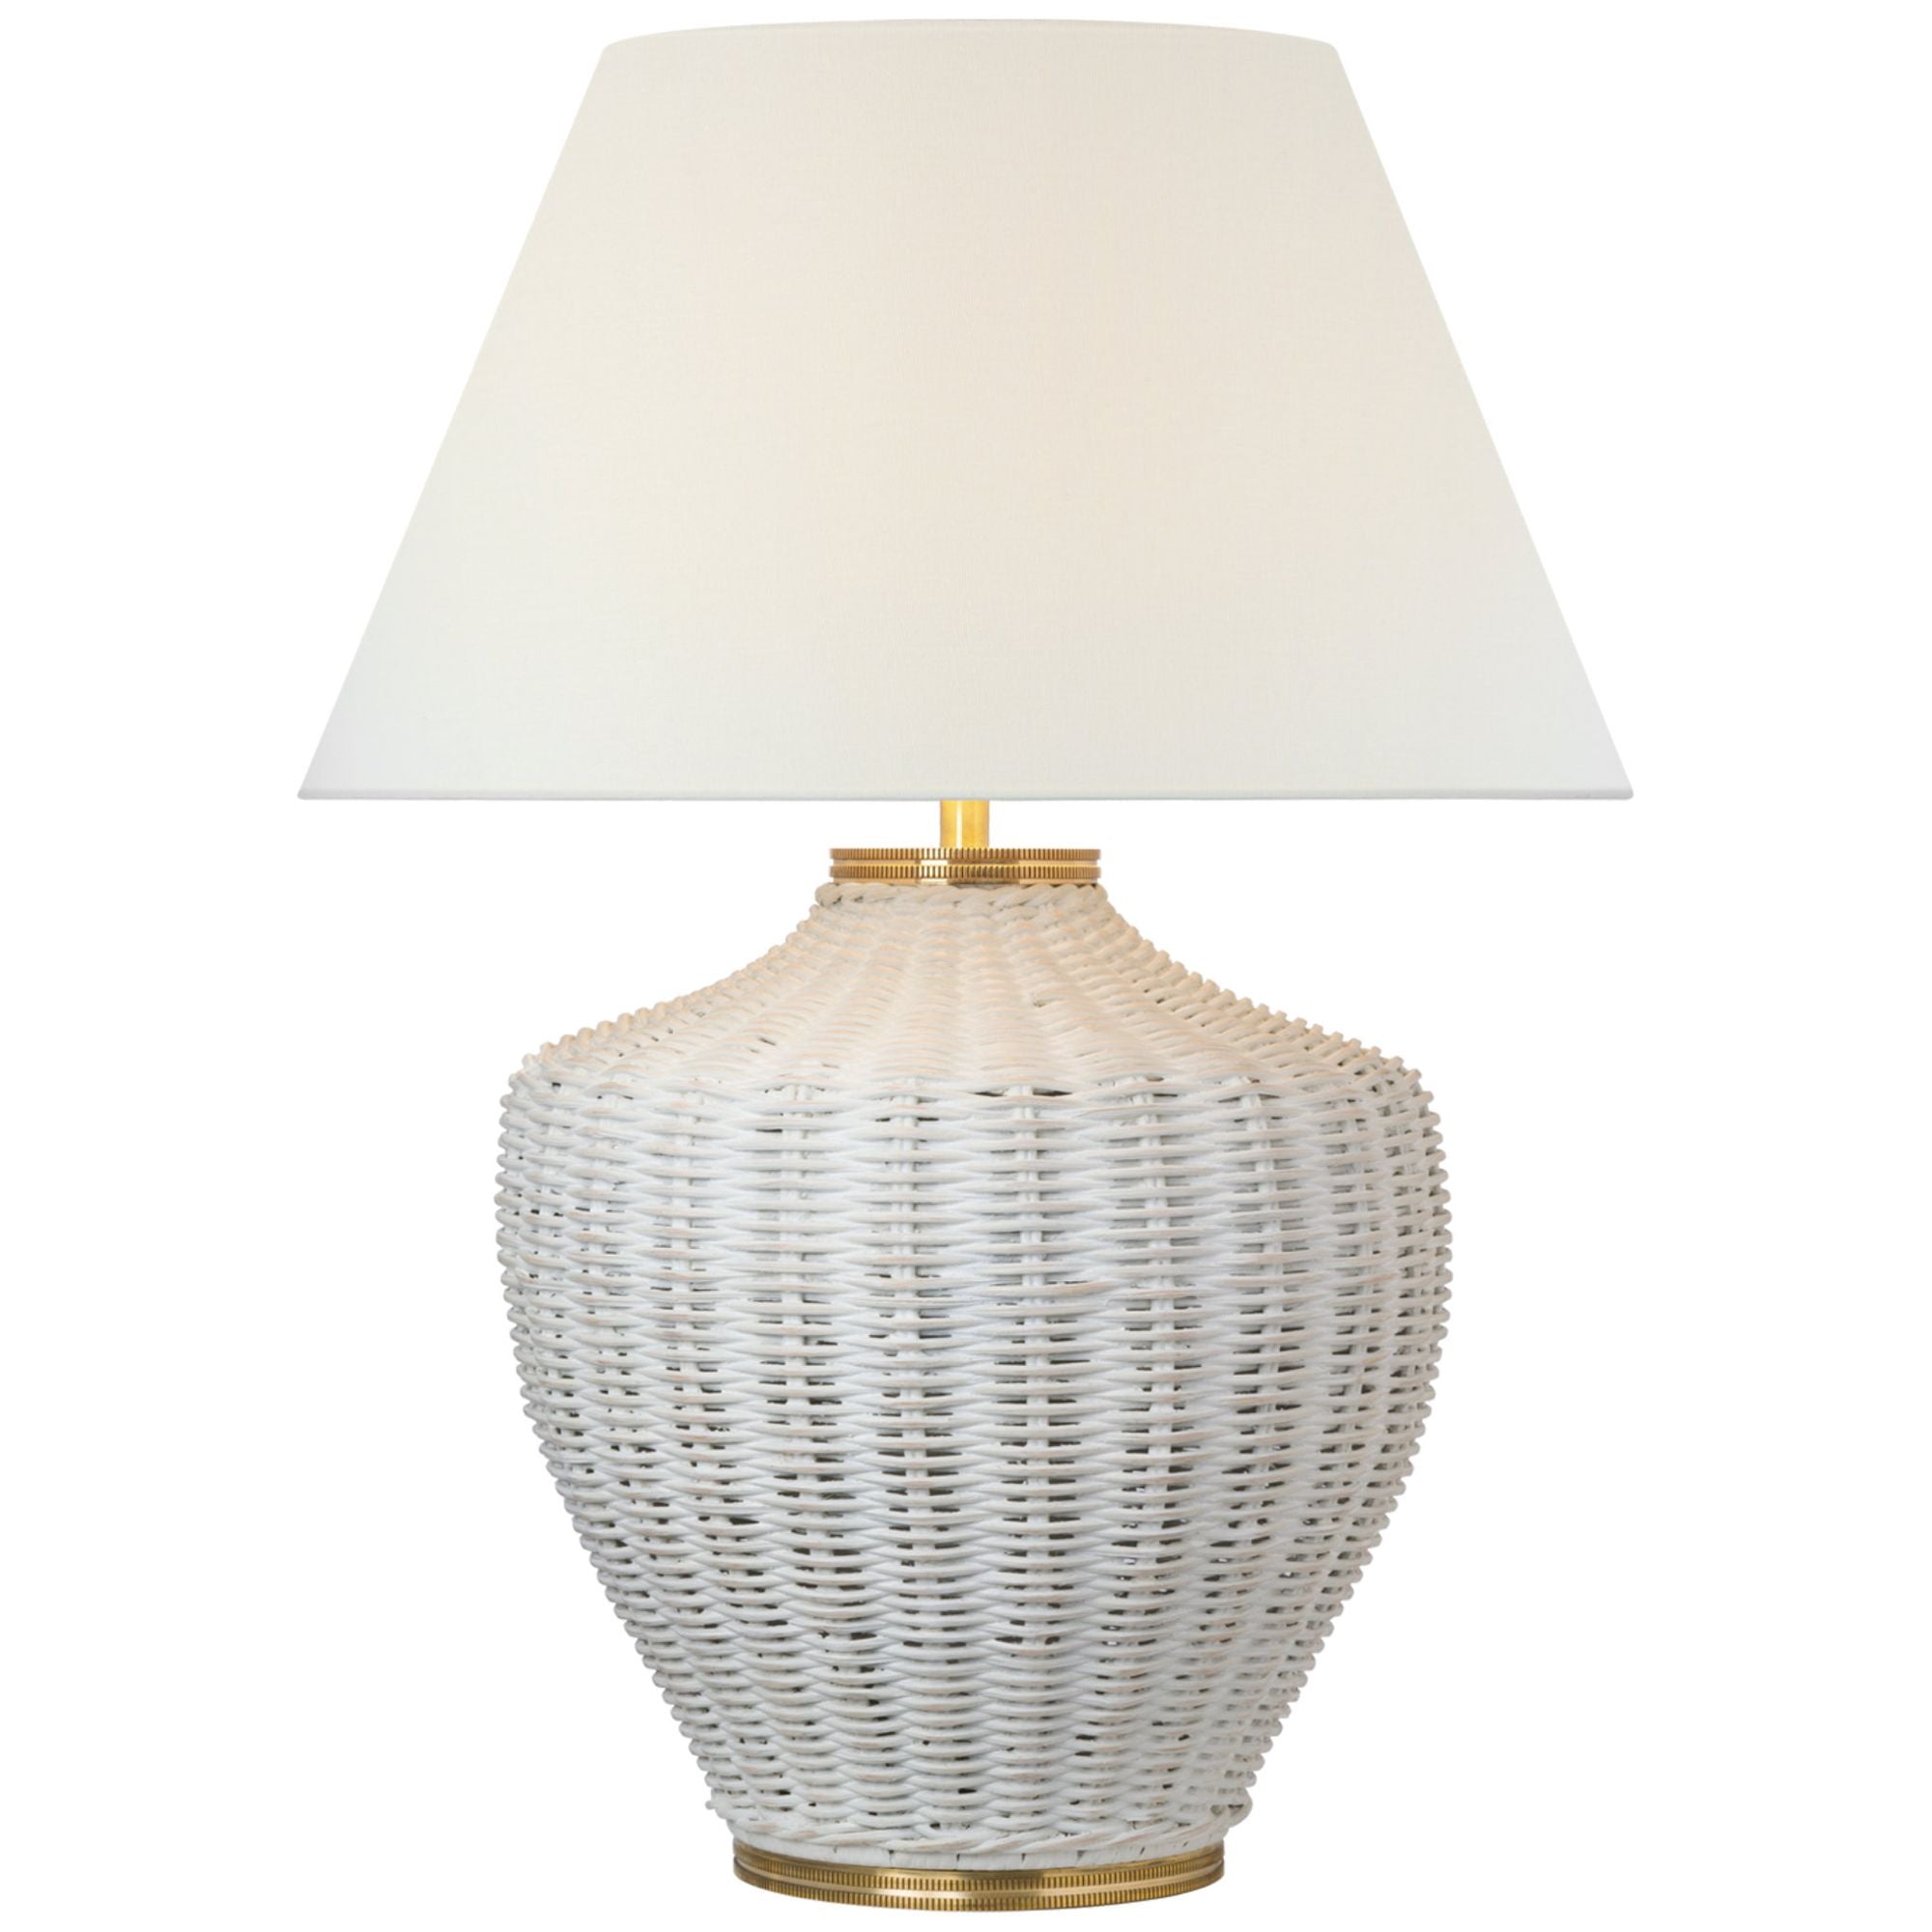 Marie Flanigan Evie Large Table Lamp in White Wicker with Linen Shade